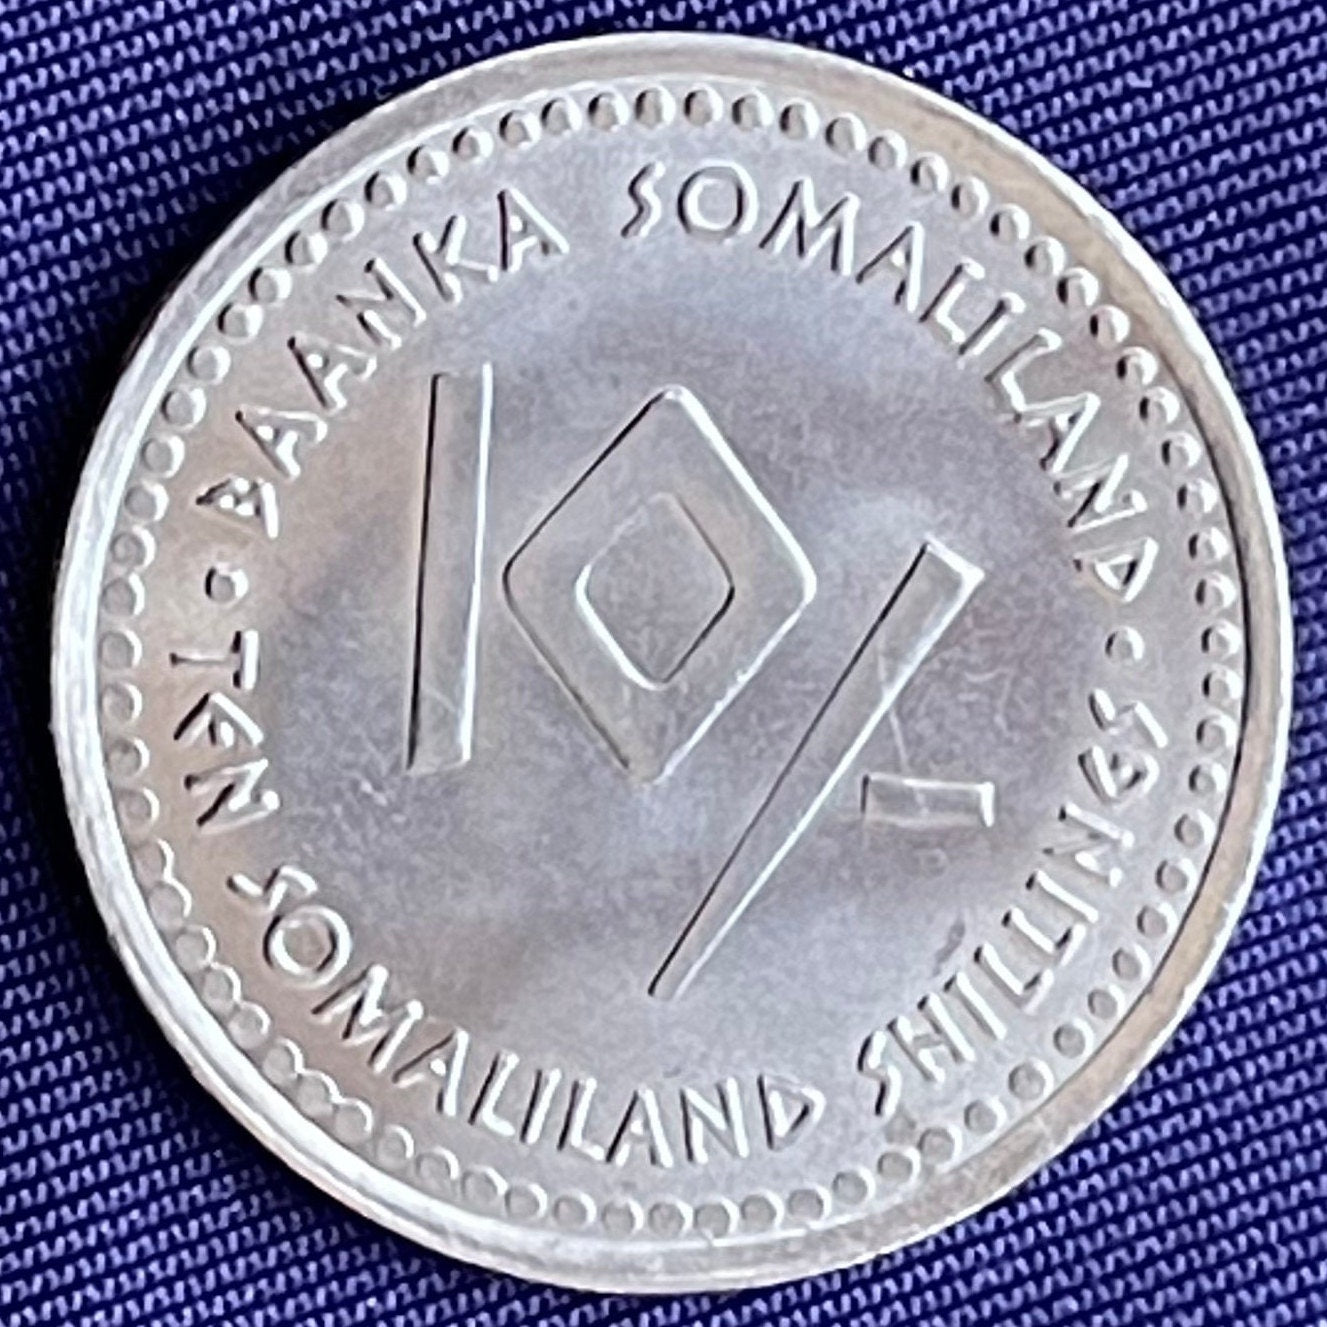 Leo the Lion 10 Shillings Somaliland Authentic Coin Money for Jewelry and Craft Making (Zodiac Series) (Astrology) Nemean Lion